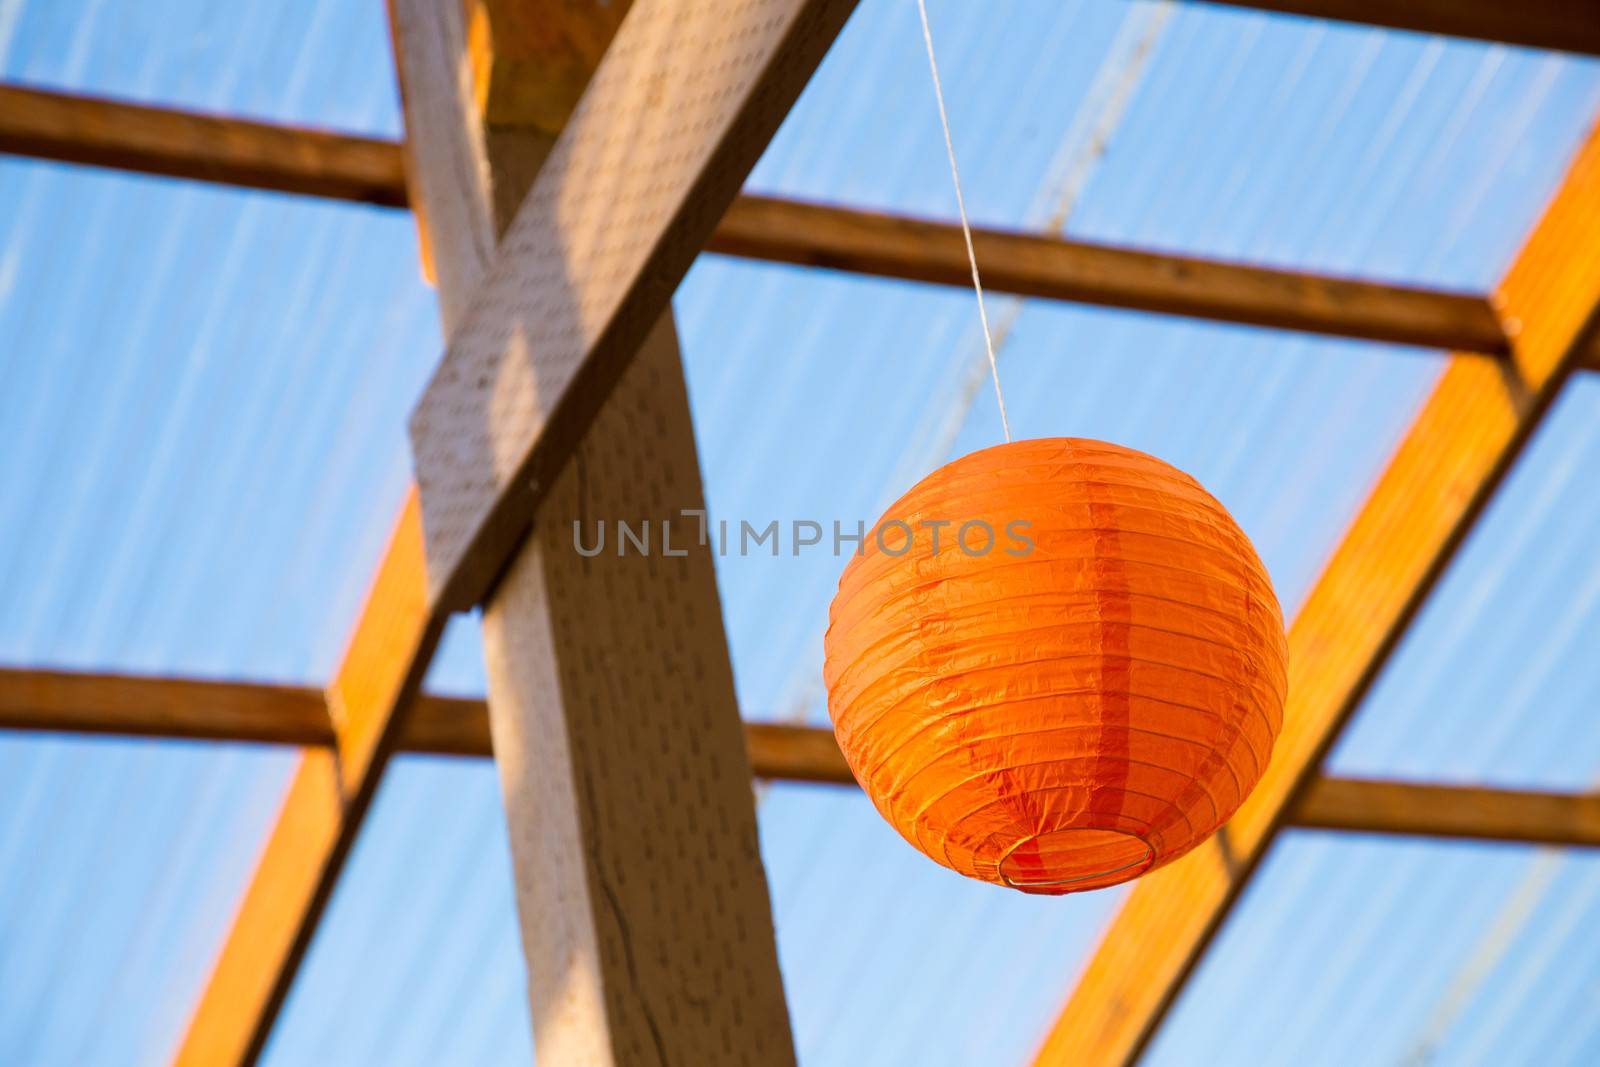 Paper Chinese lanterns are used as decorations or decor for this classy wedding reception.